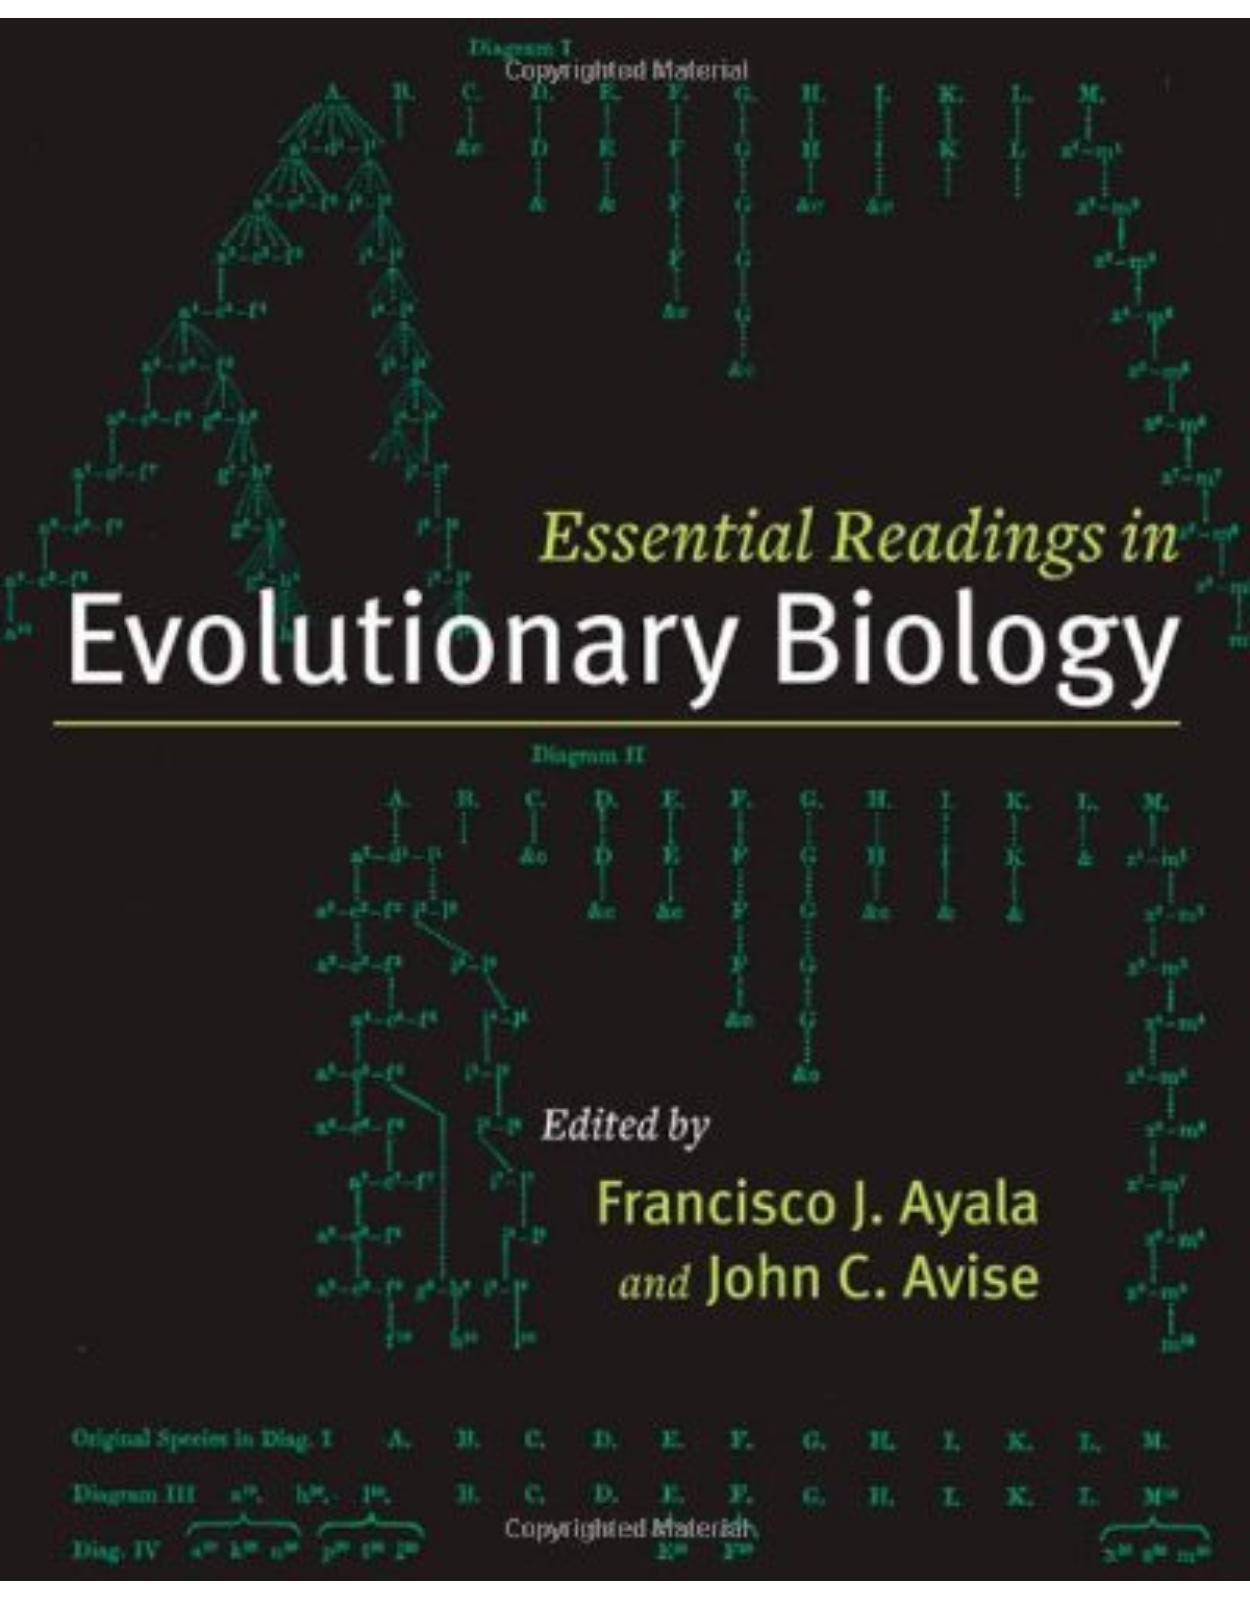 Essential Readings in Evolutionary Biology,